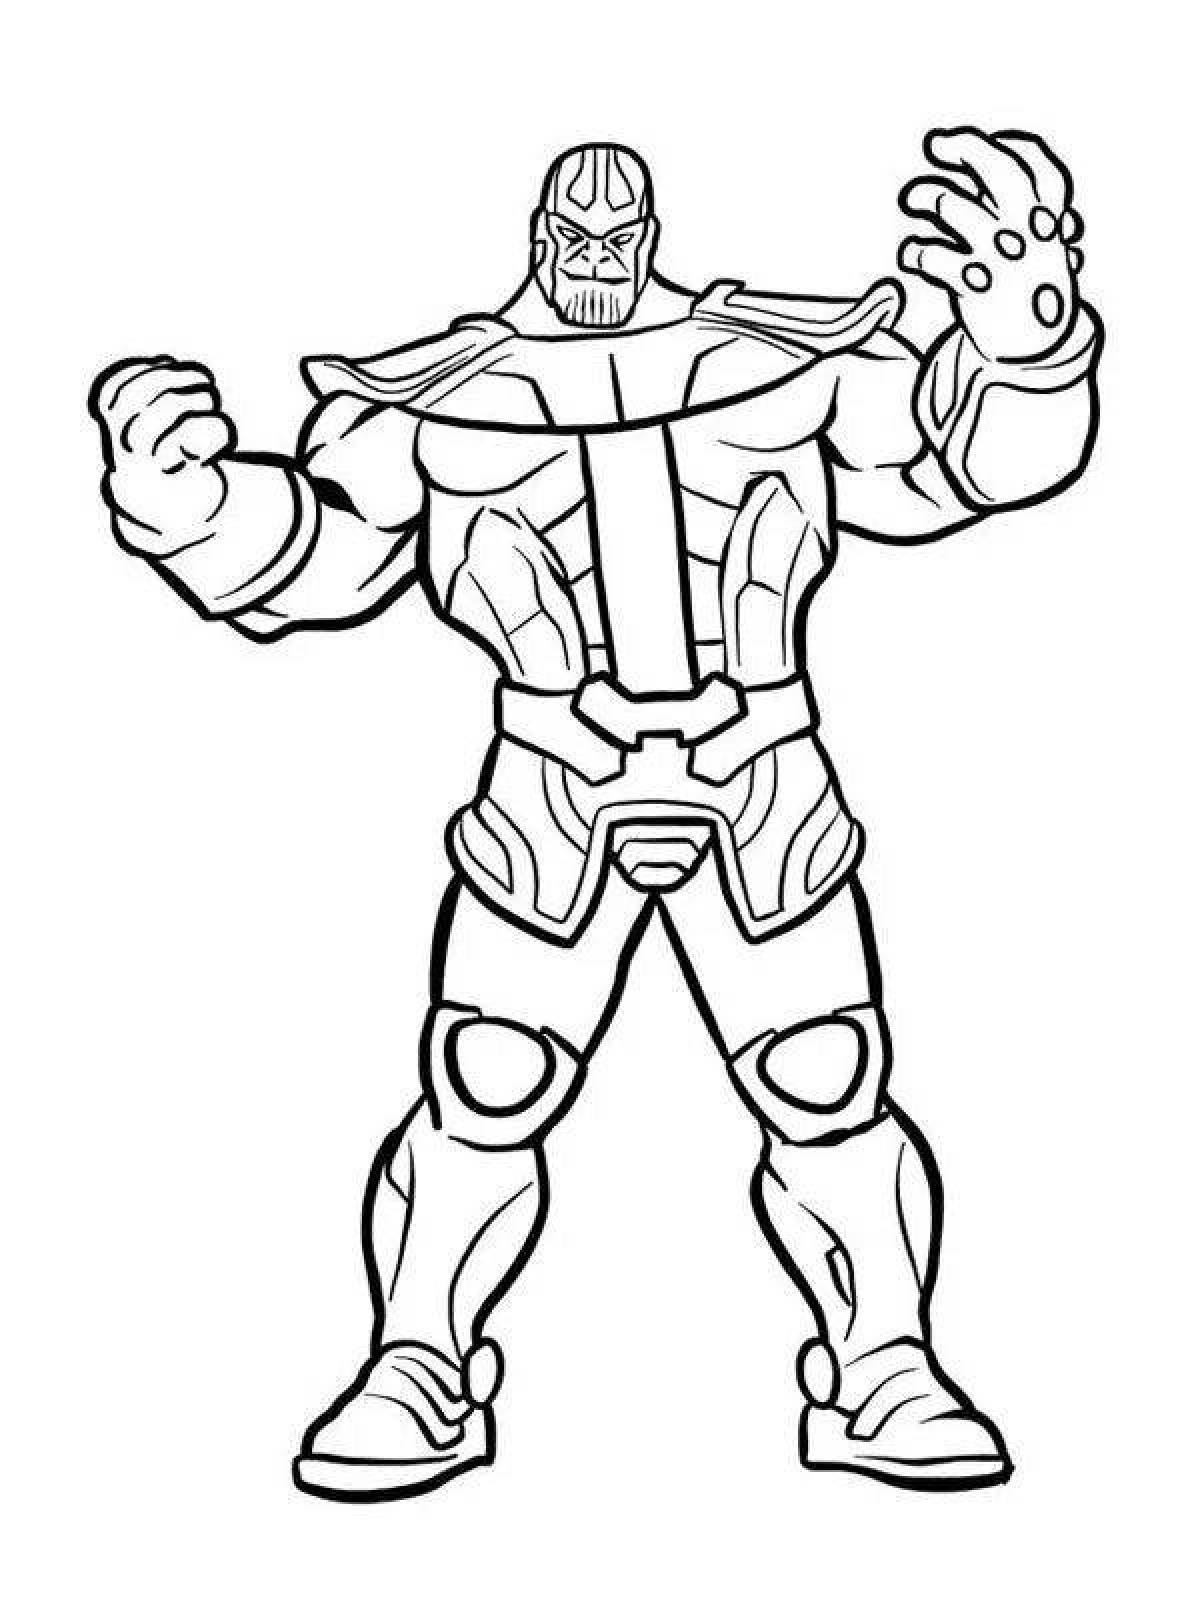 Charming tanus coloring page